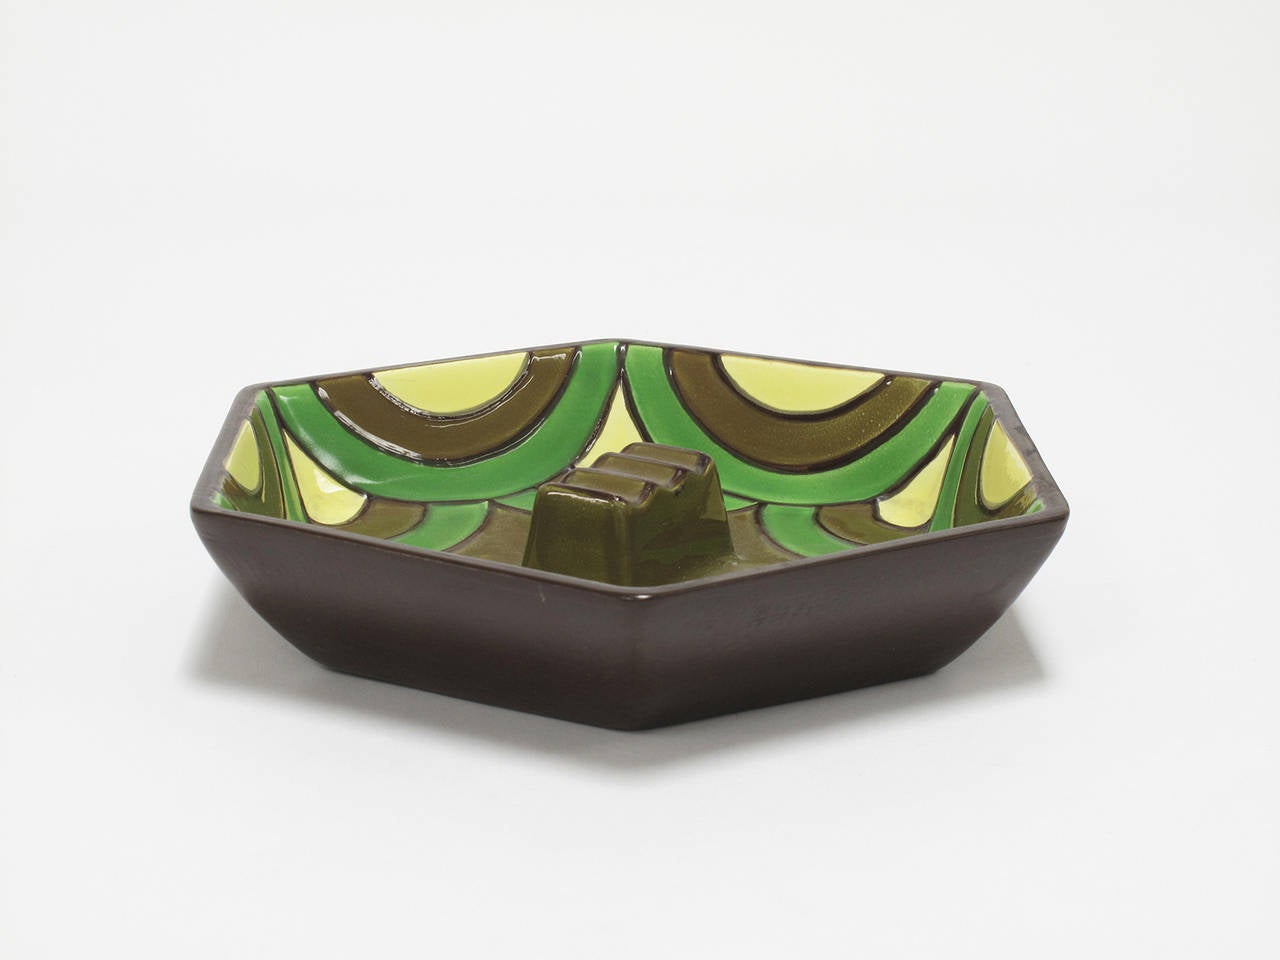 Colorful hand decorated, glazed ceramic dish, part of the contemporary collection designed exclusively for Haeger by Ben Seibel, celebrating "the look of today with youth appeal." An exclusive import, marked on bottom "Haeger,"